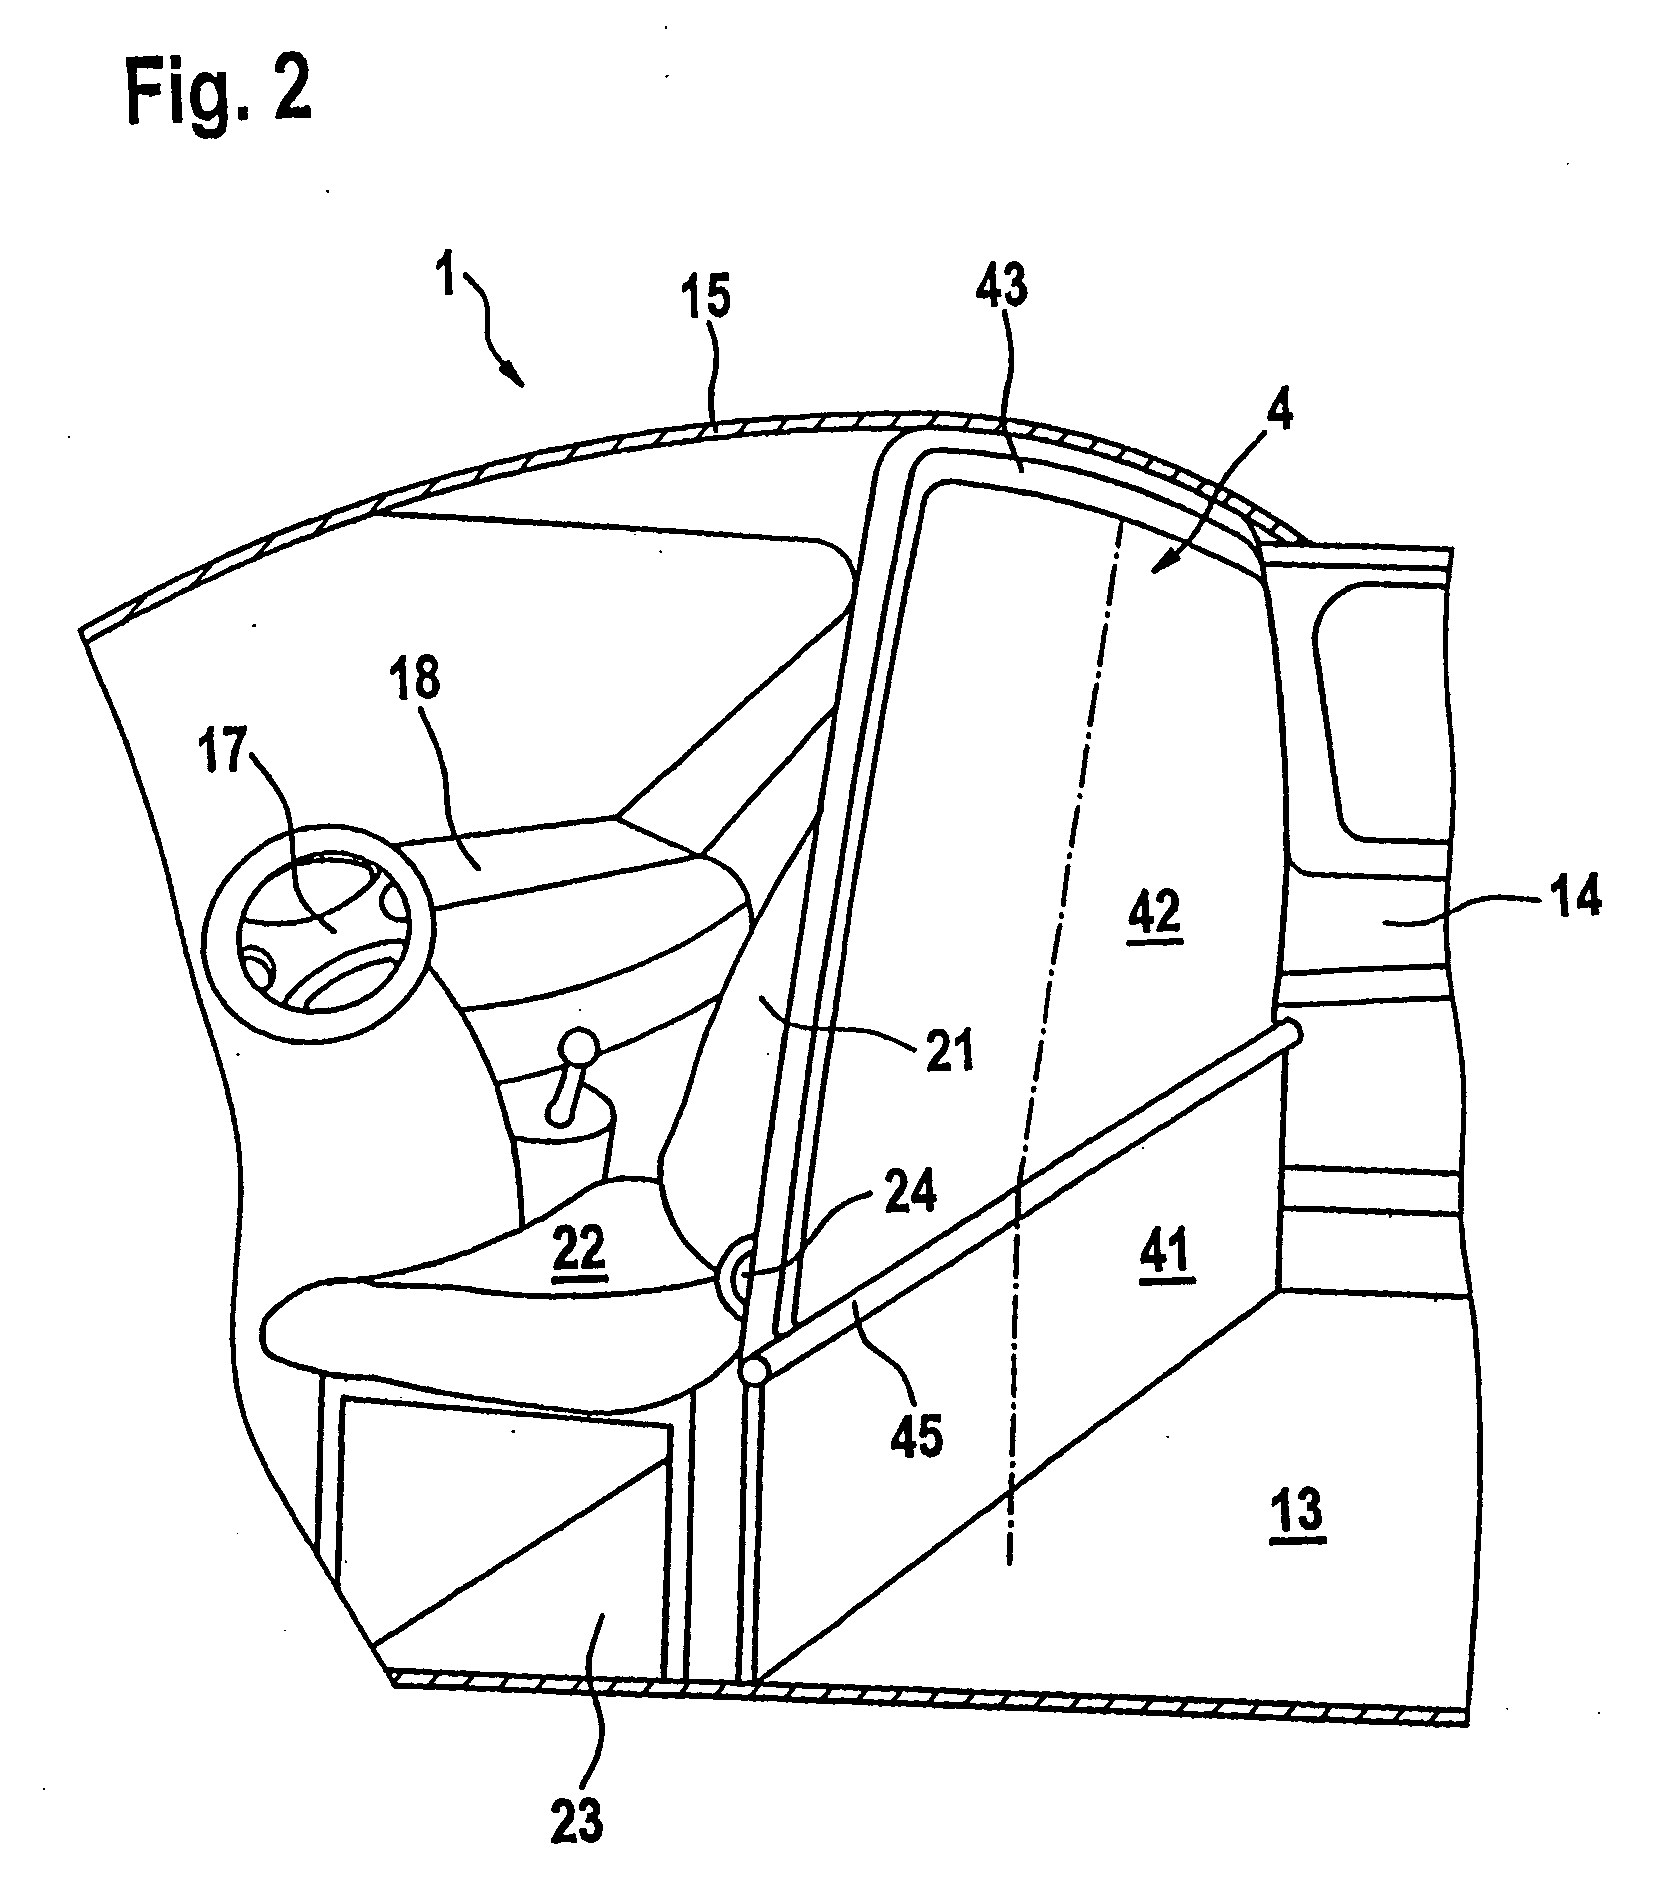 Motor vehicle with partition